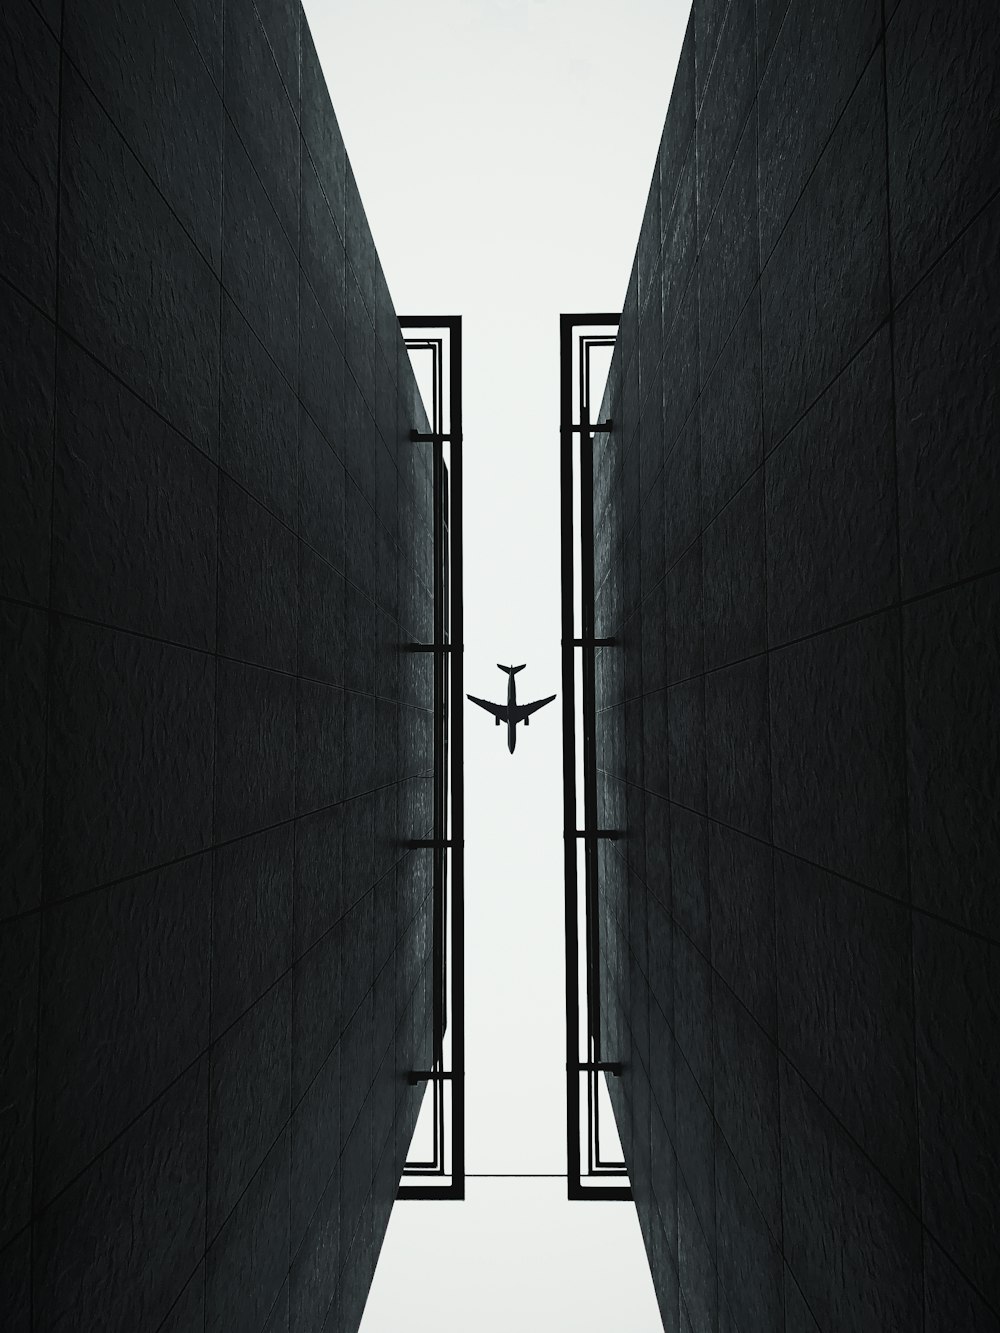 an airplane is flying through the air between two buildings